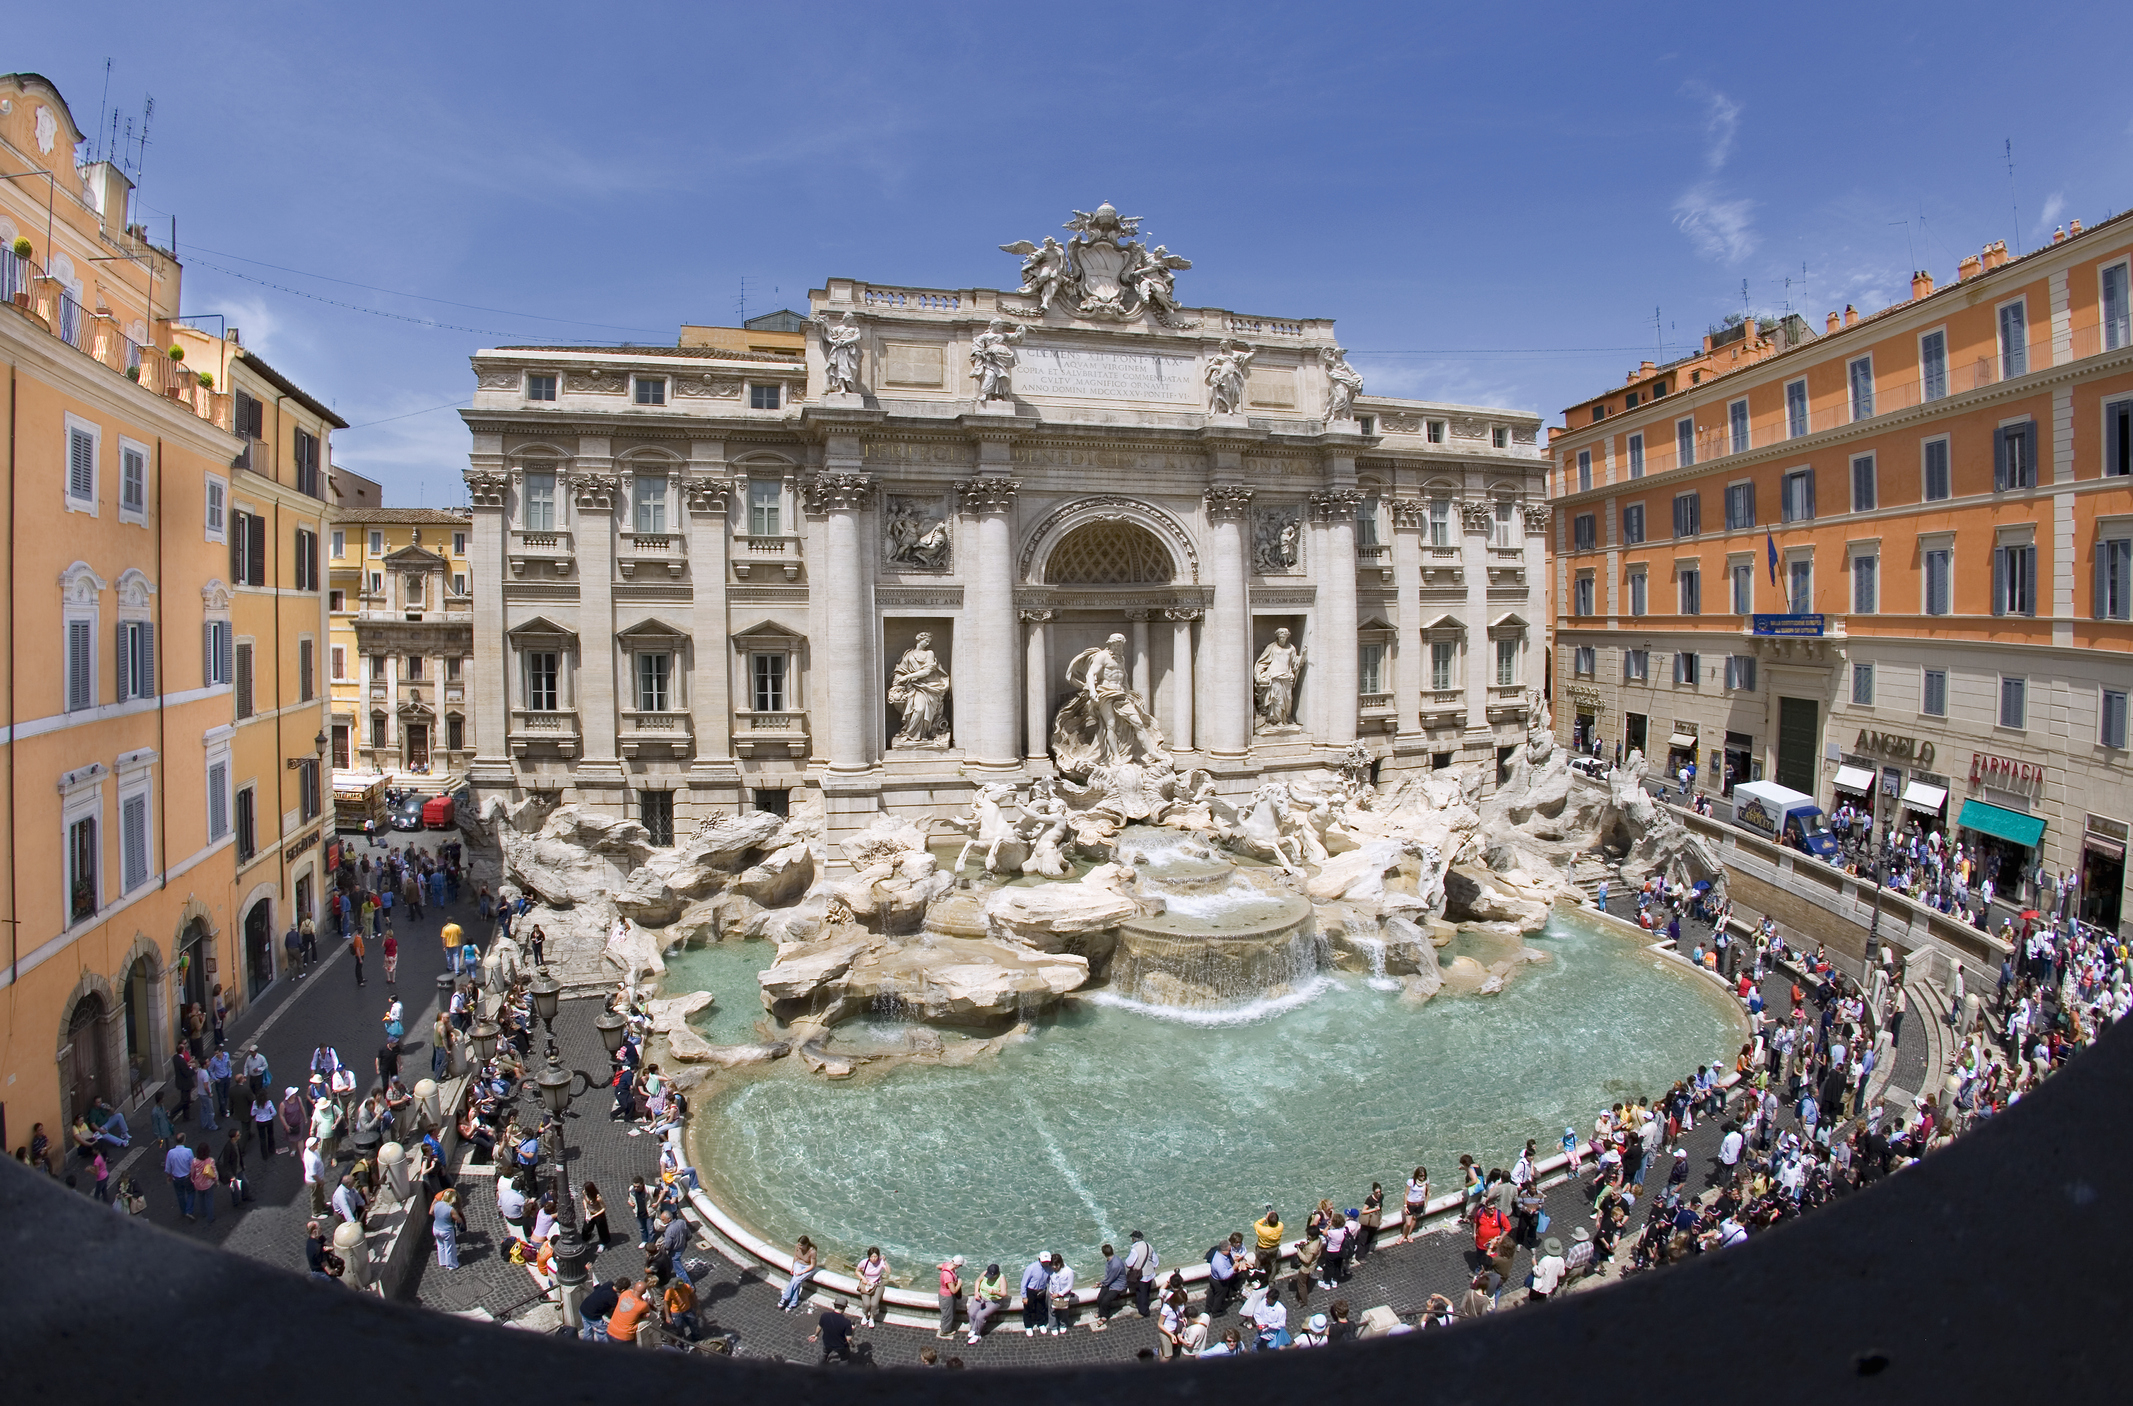 Wide view of the Trevi Fountain in Rome with a crowd of tourists surrounding it and historic buildings in the background